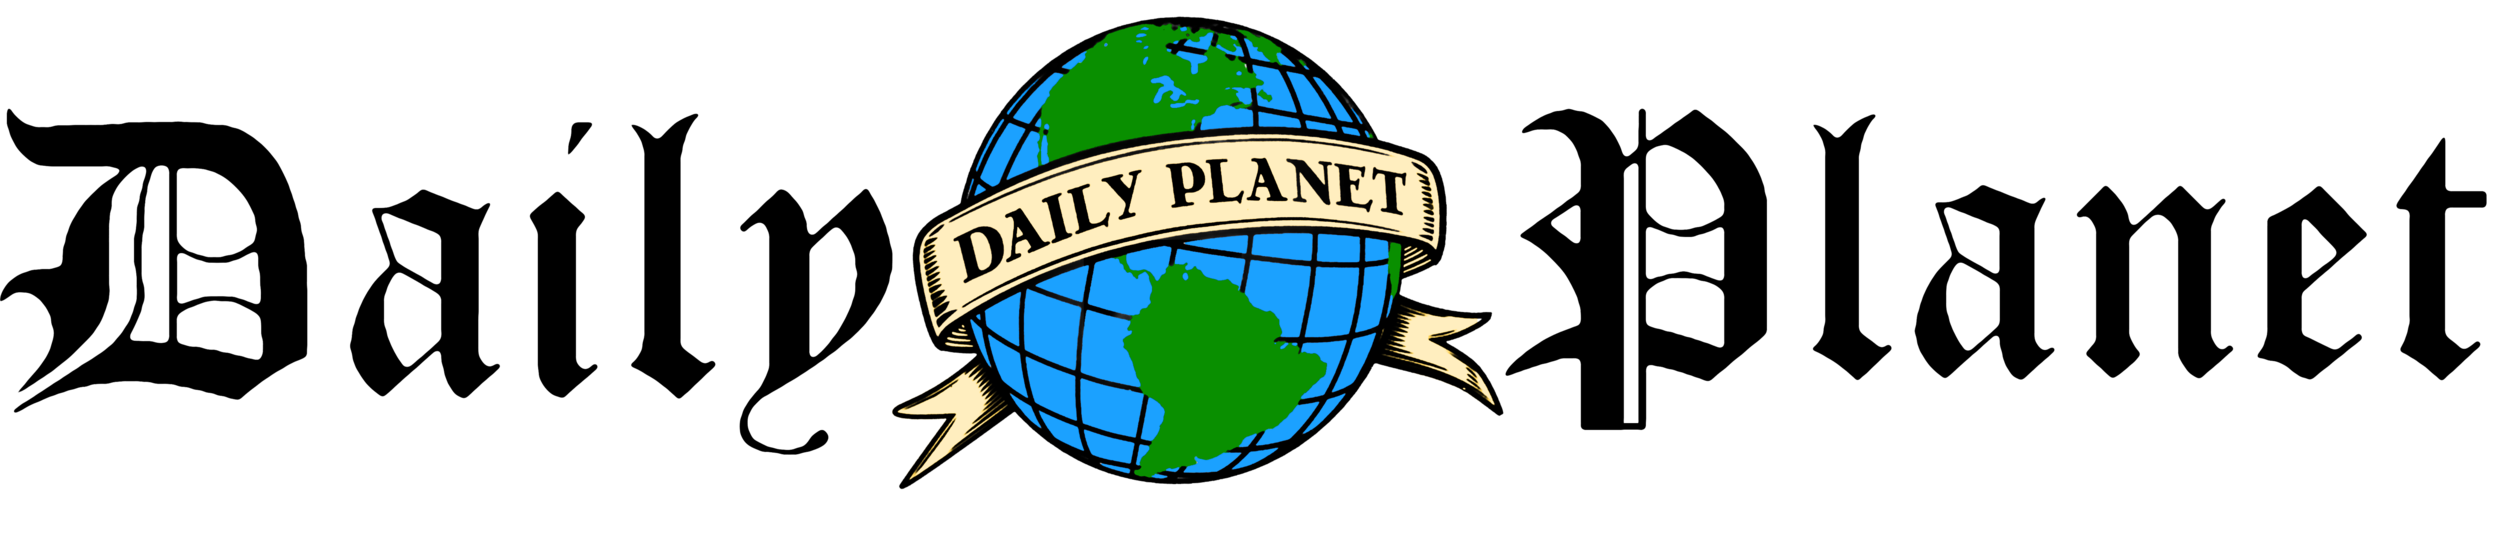 daily planet.png